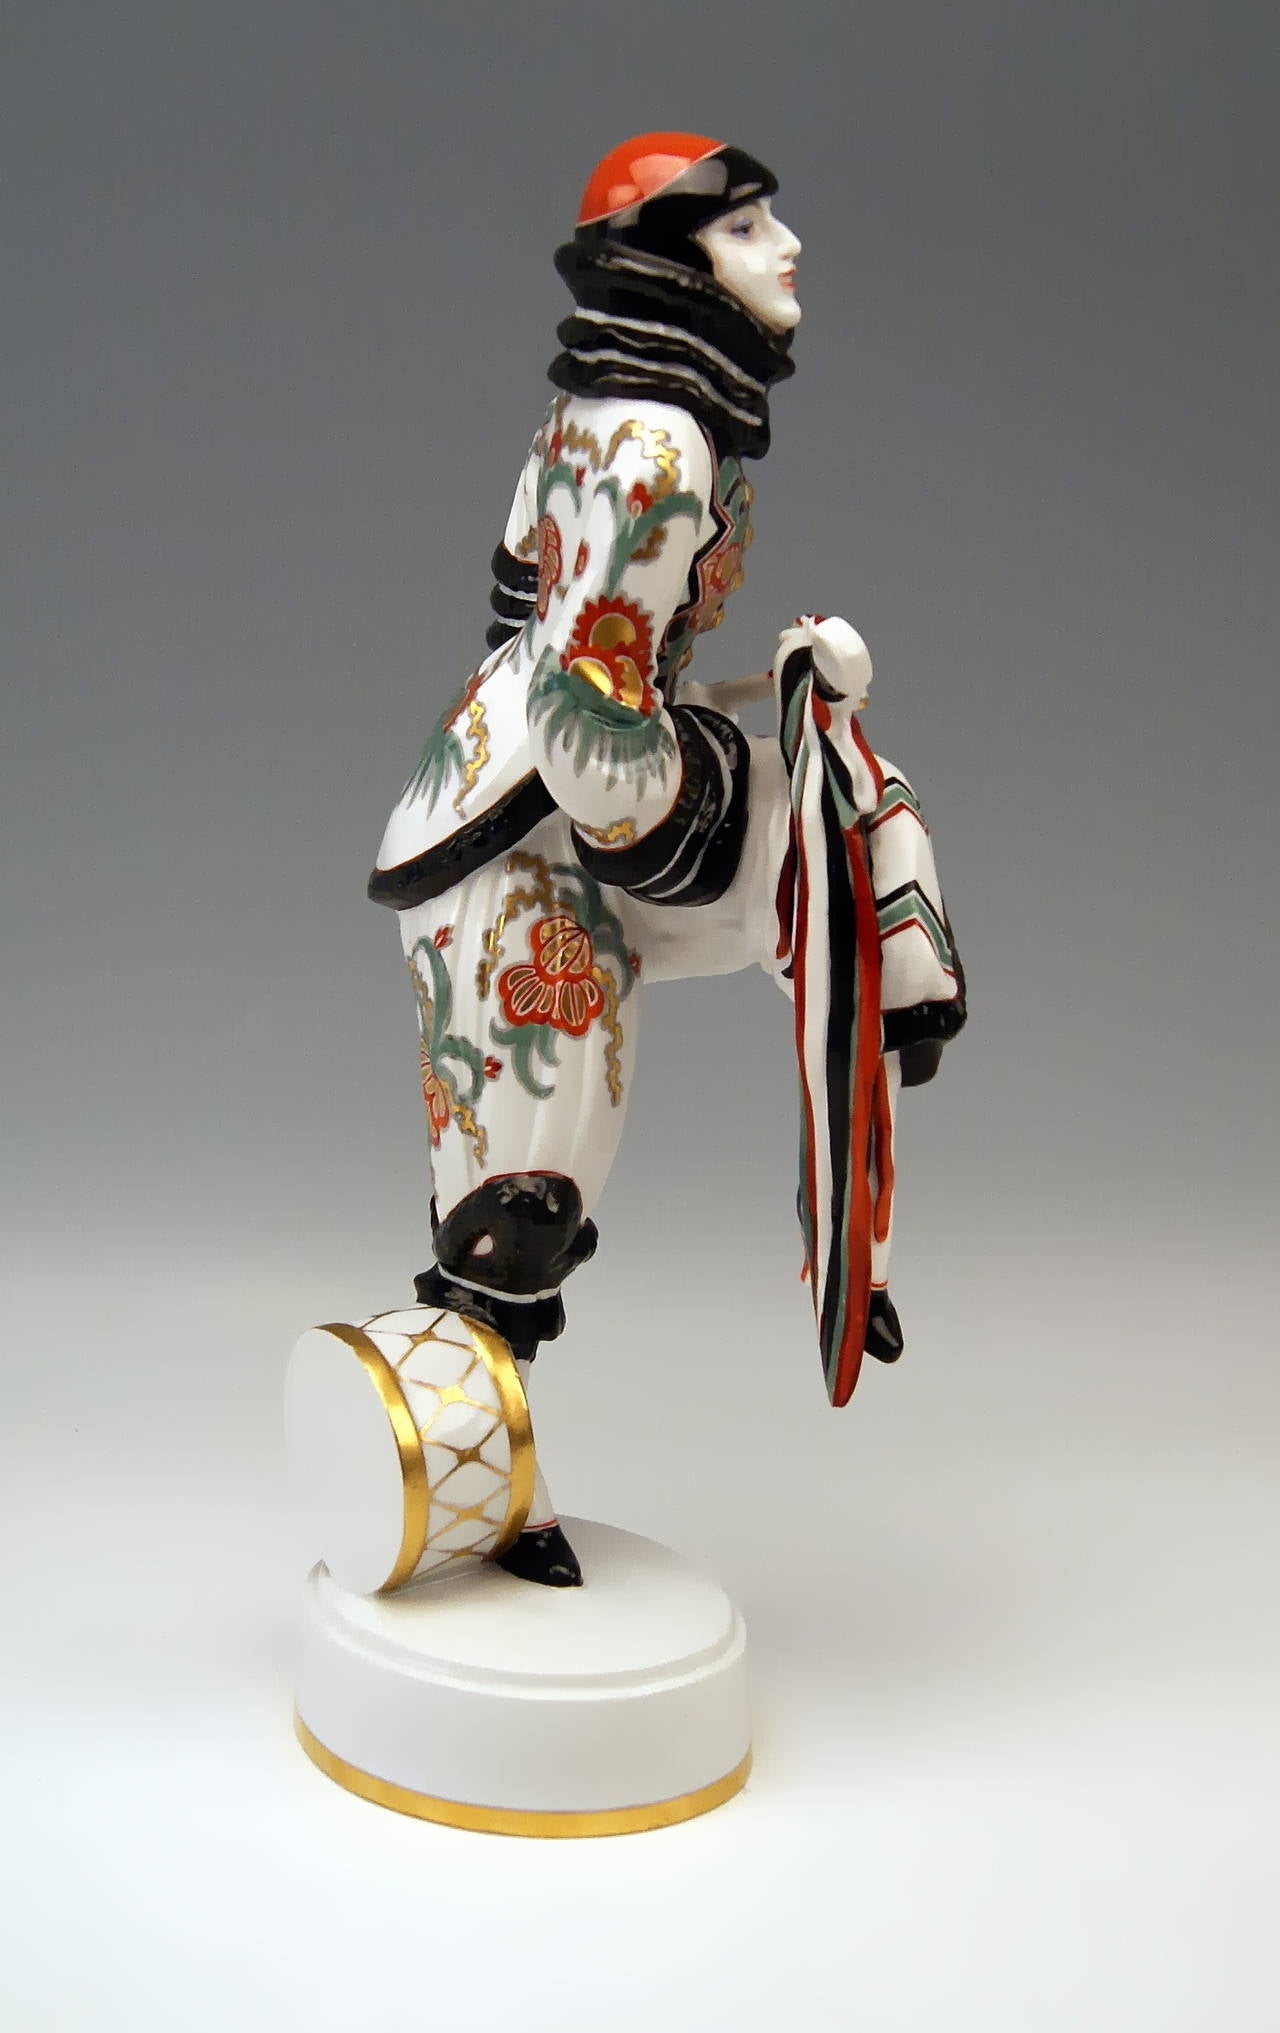 Gorgeous Rosenthal Germany Nicest Figurine modelled by 
Constantin Holzer-Defanti   |  model created in year 1919
manufactured 1929

It is the figurine of Polish-German dancer and actress LENA AMSEL* playing the lute here:  The figurine is